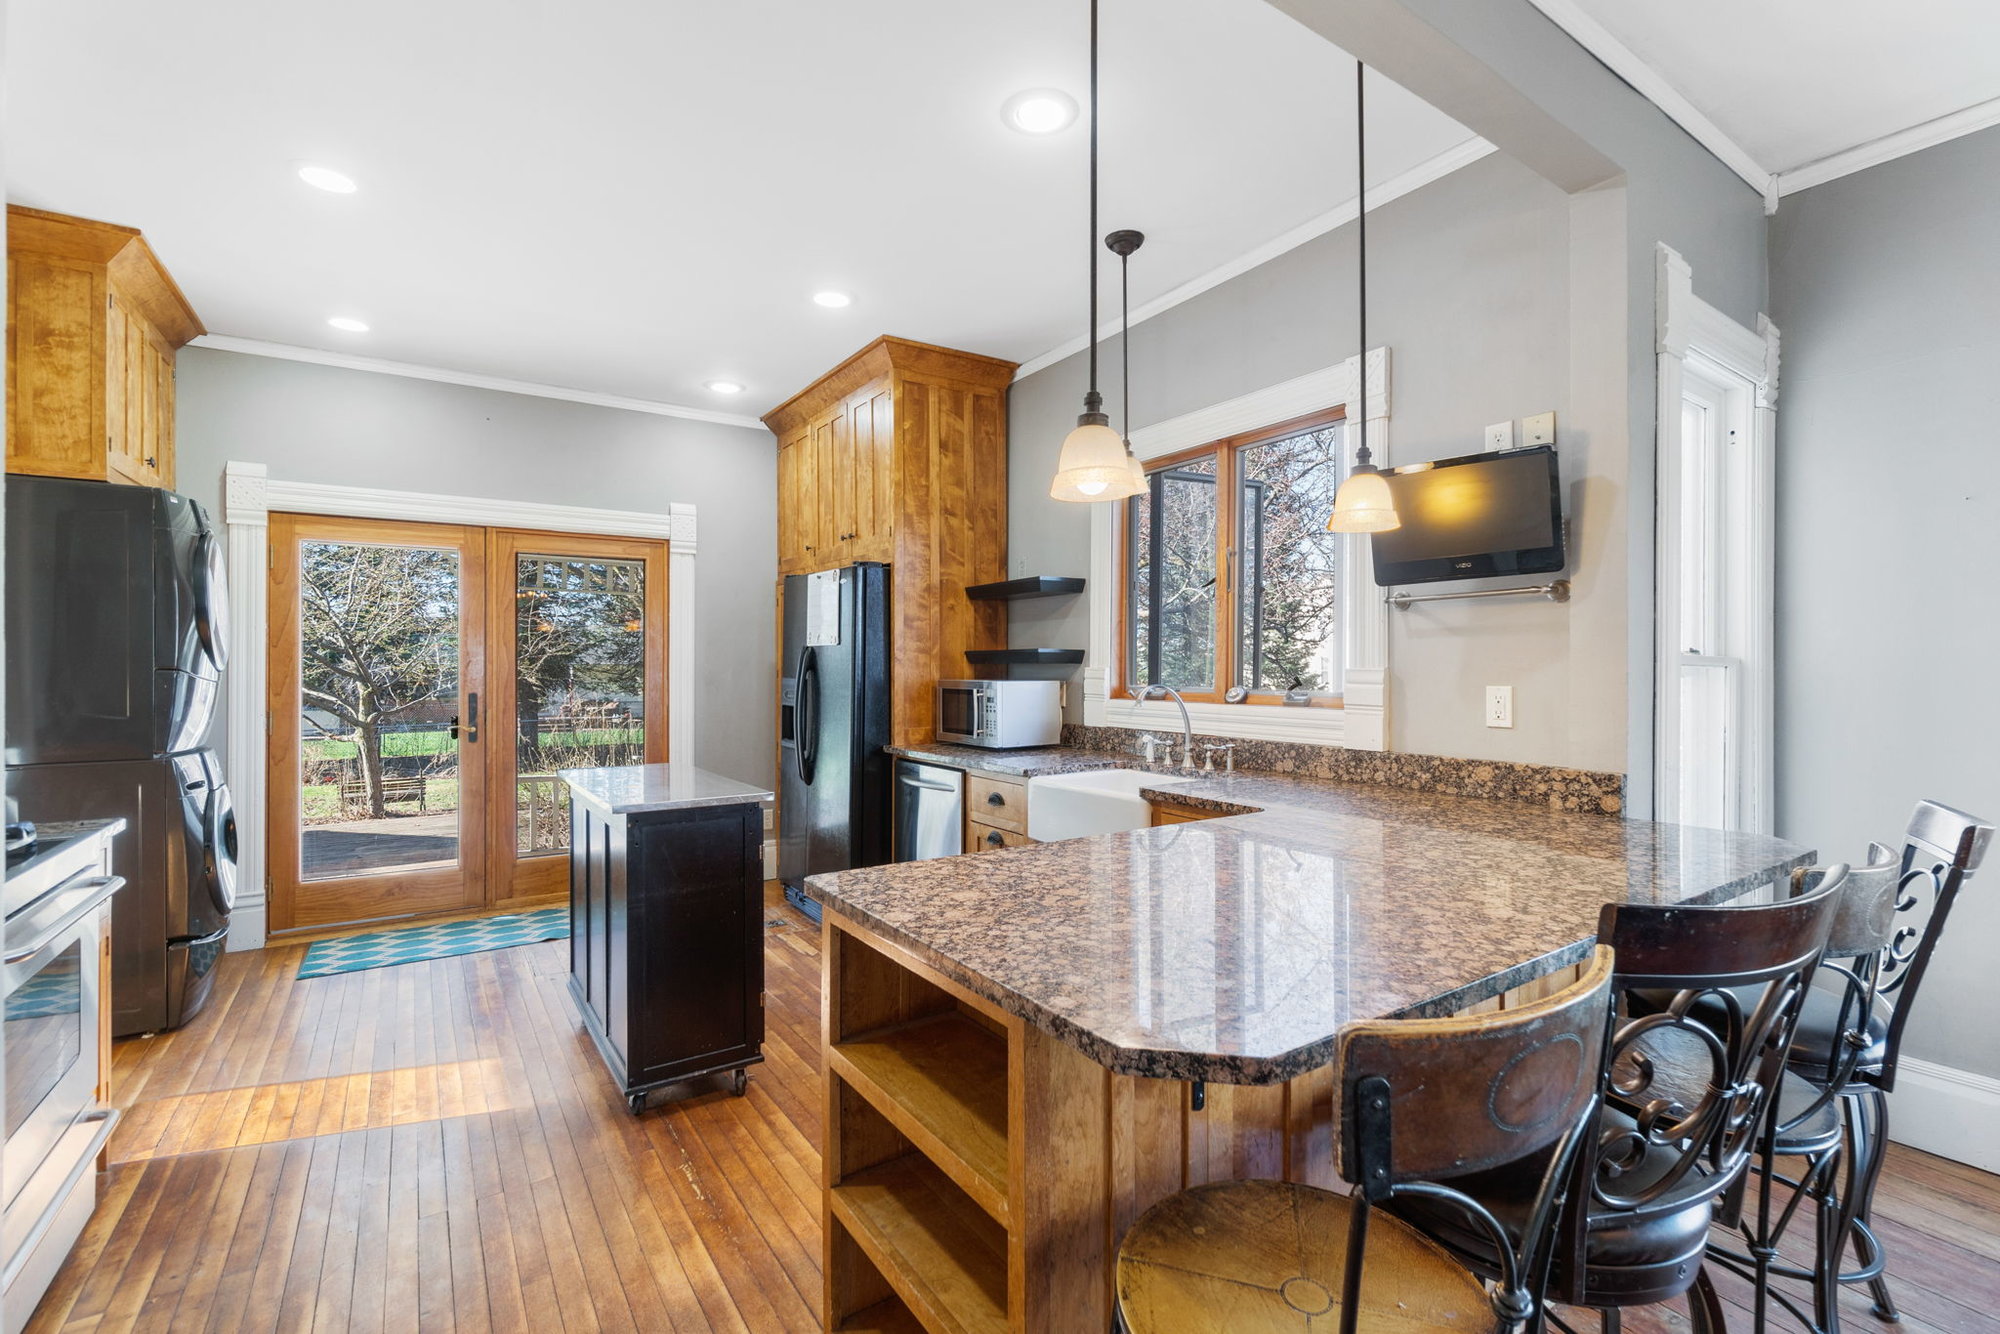 Find all the Beautiful Character in this Queen Anne Home | Oakridge Real Estate